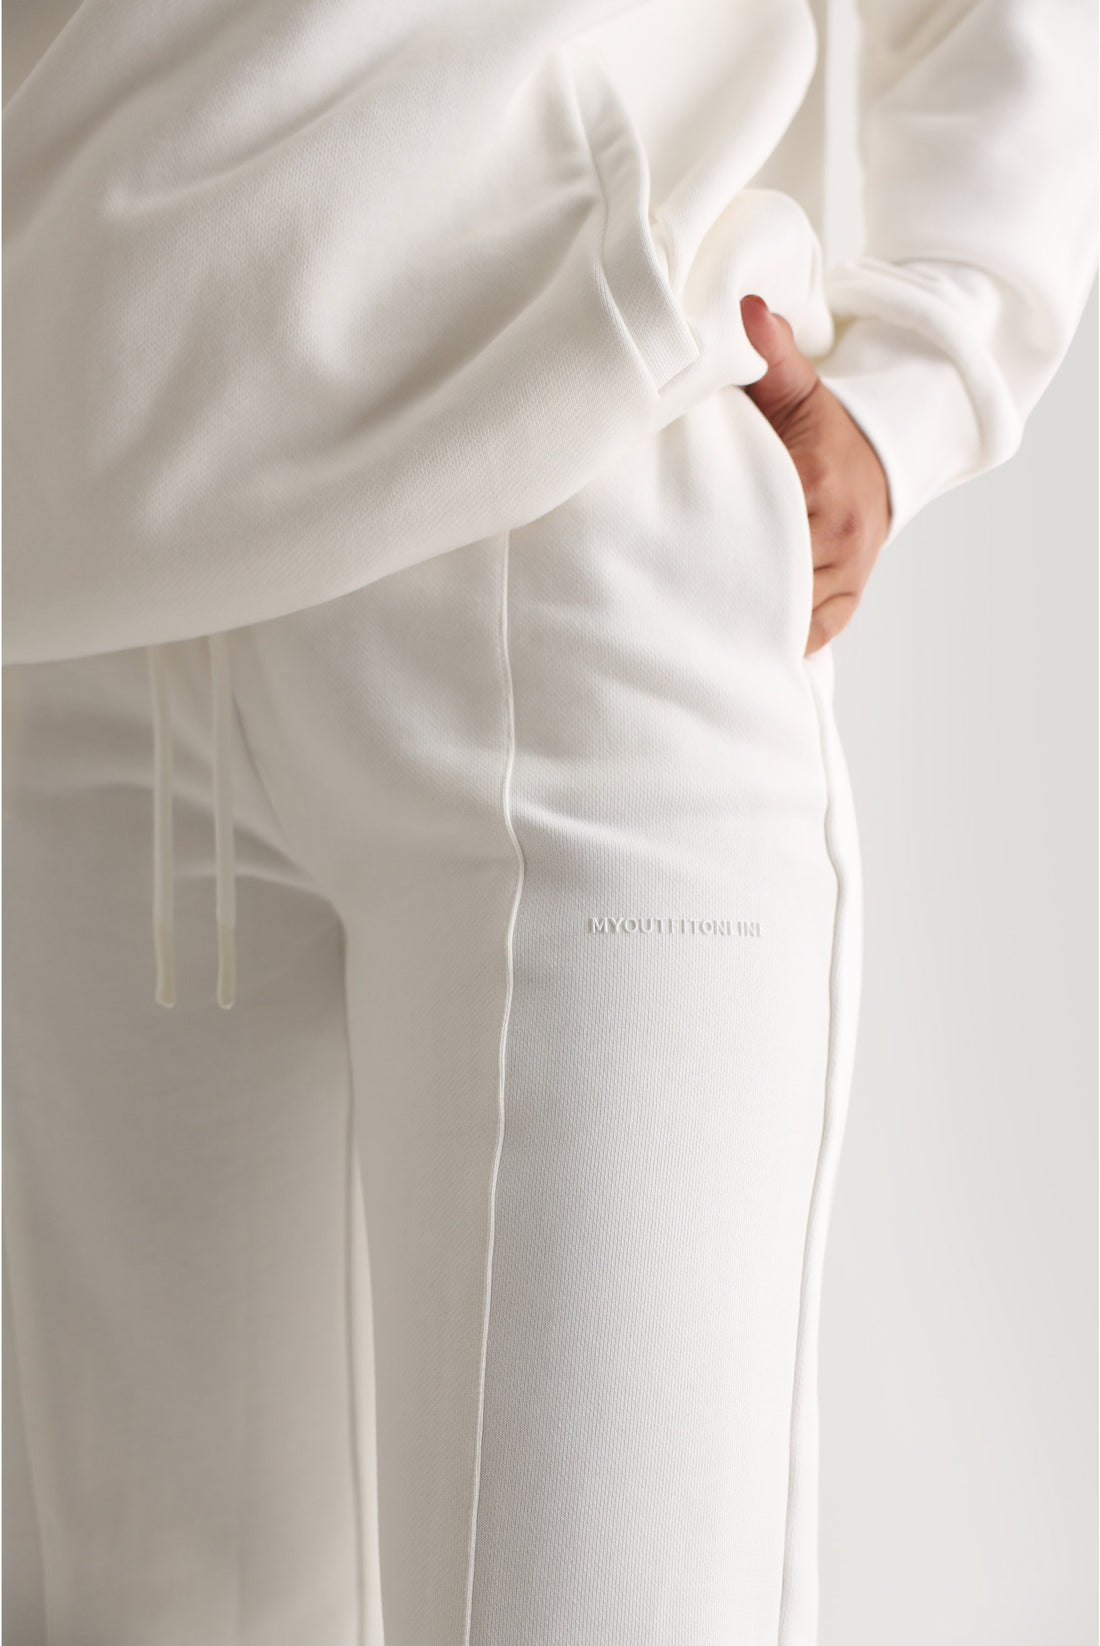 Structured Wide Leg Sweatpants  - White